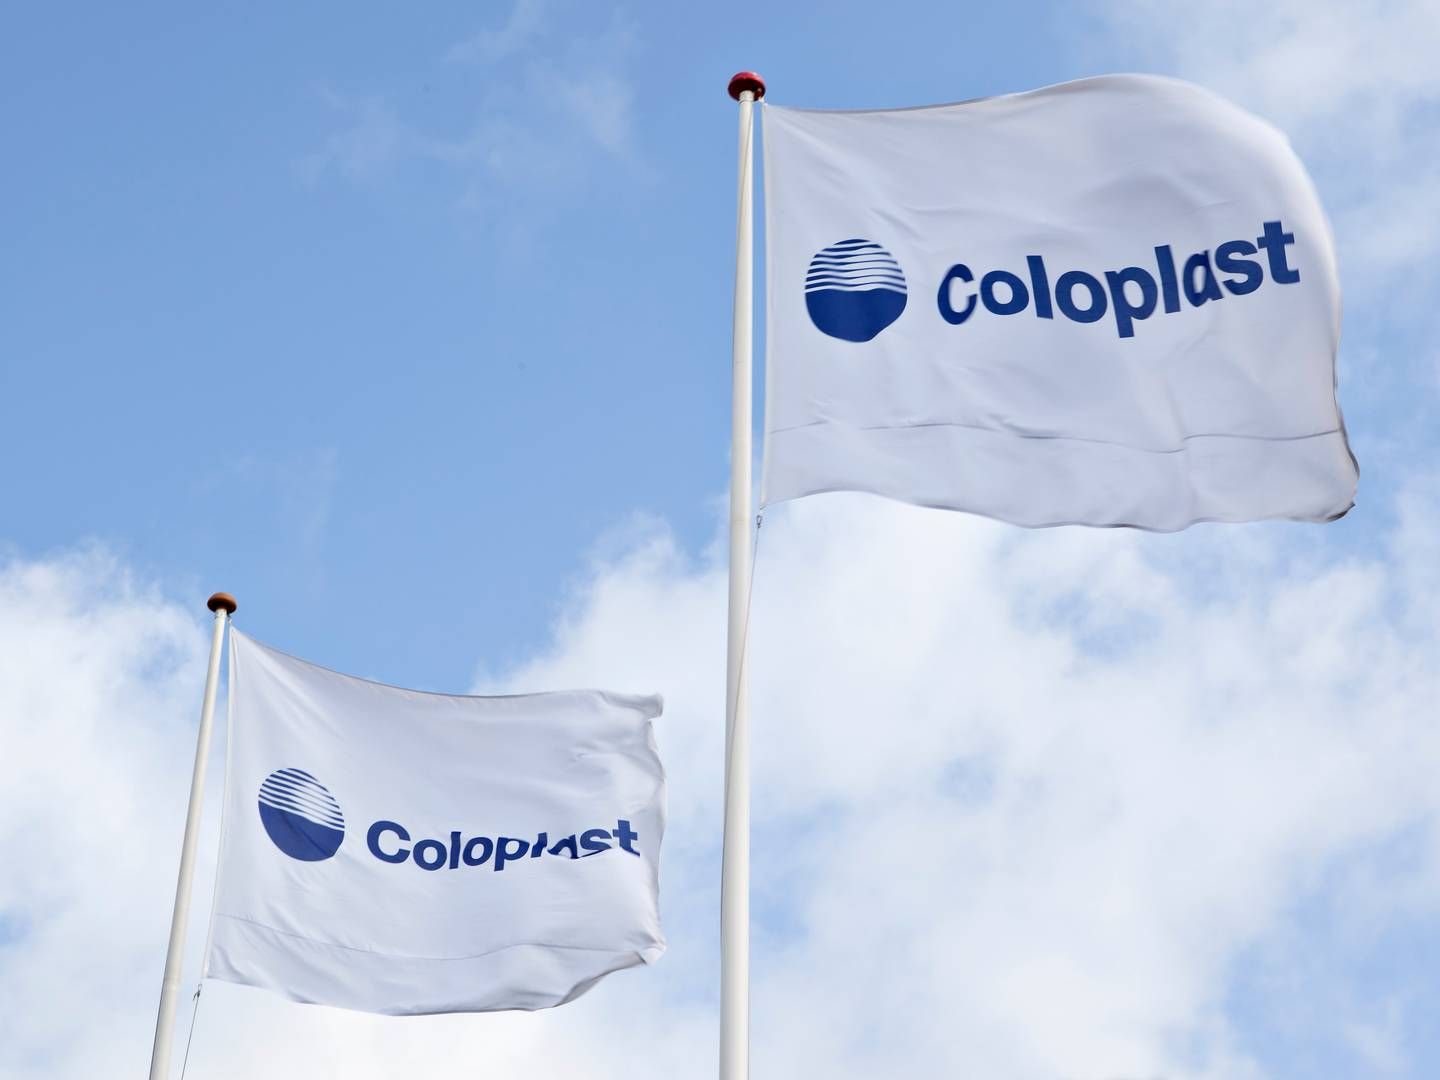 It is rather new for Coloplast to be conducting clinical trials of its equipment, says one analyst | Foto: Coloplast / Pr